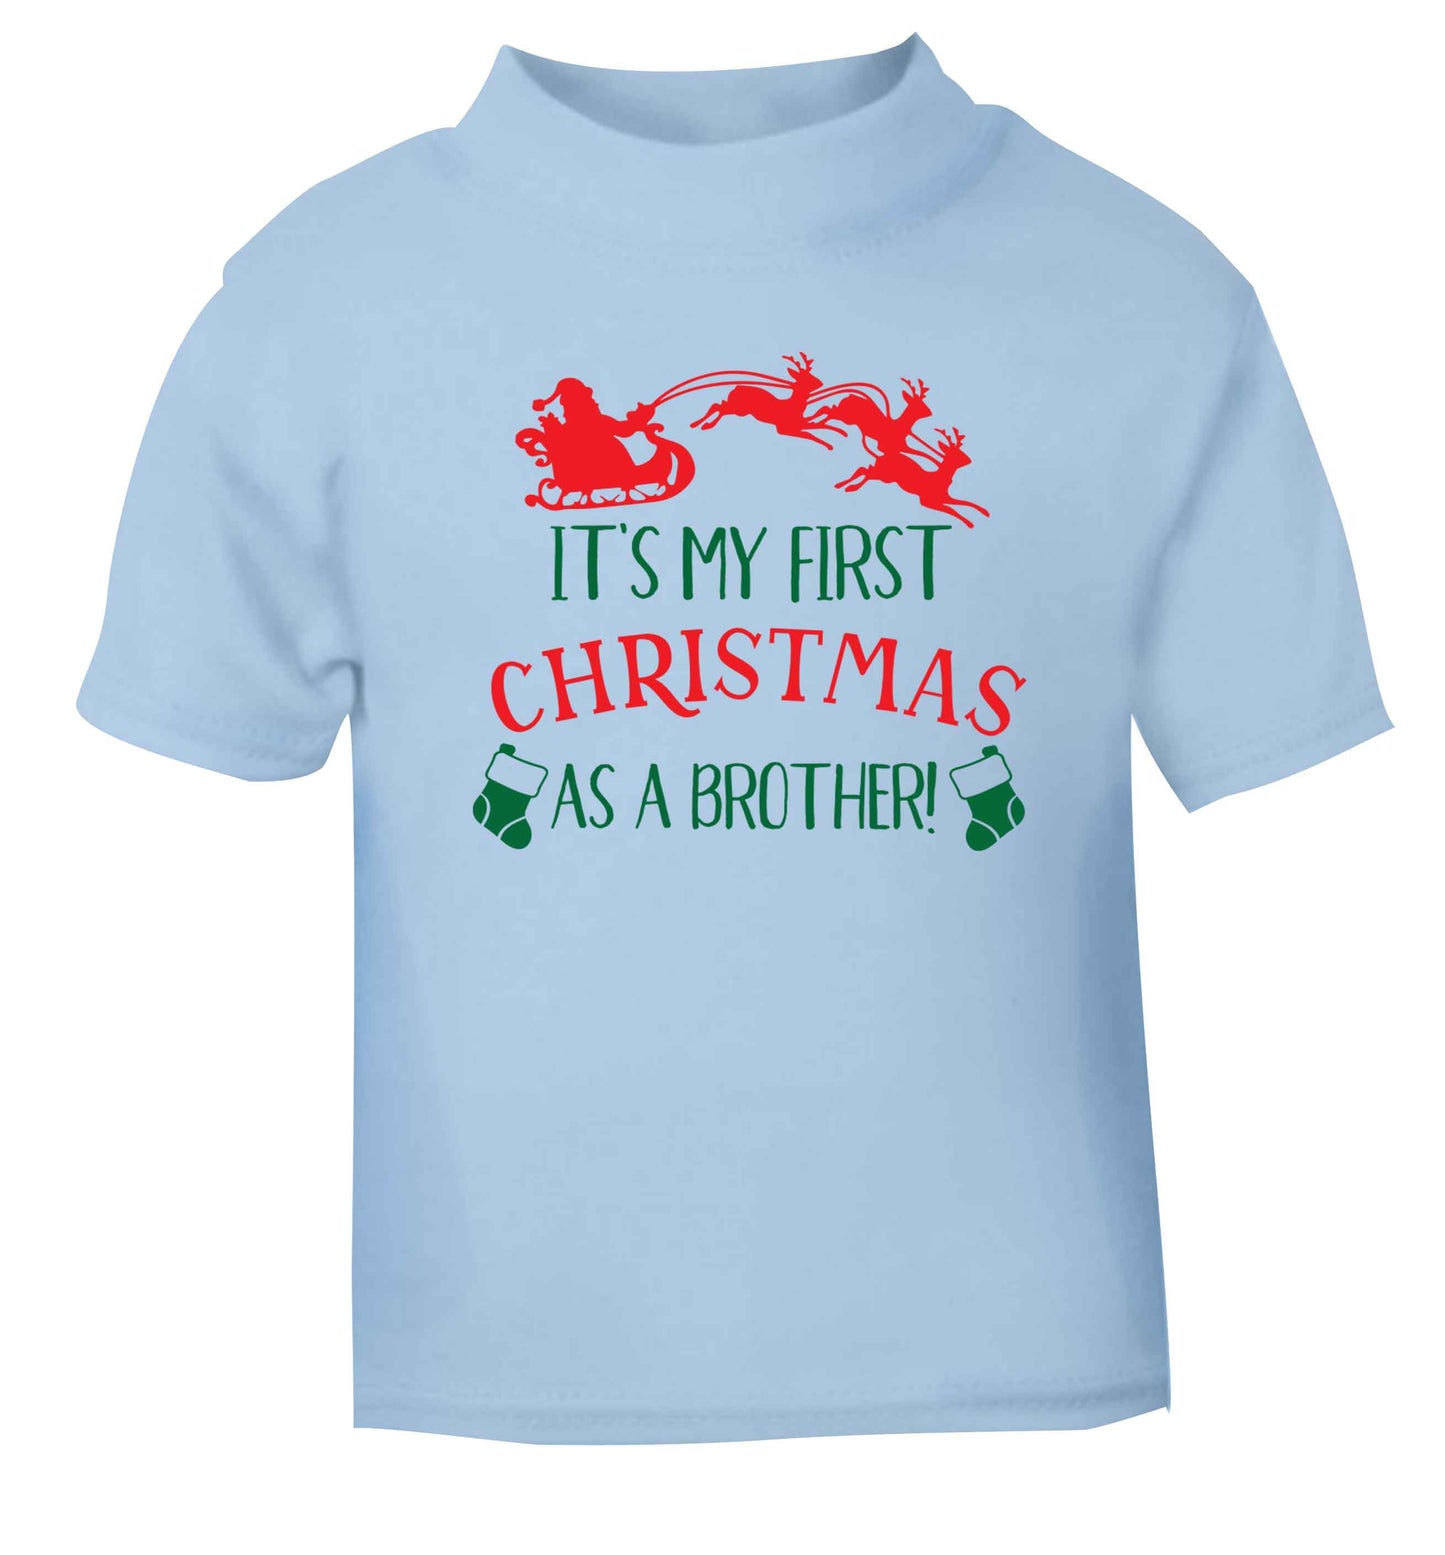 It's my first Christmas as a brother! light blue Baby Toddler Tshirt 2 Years